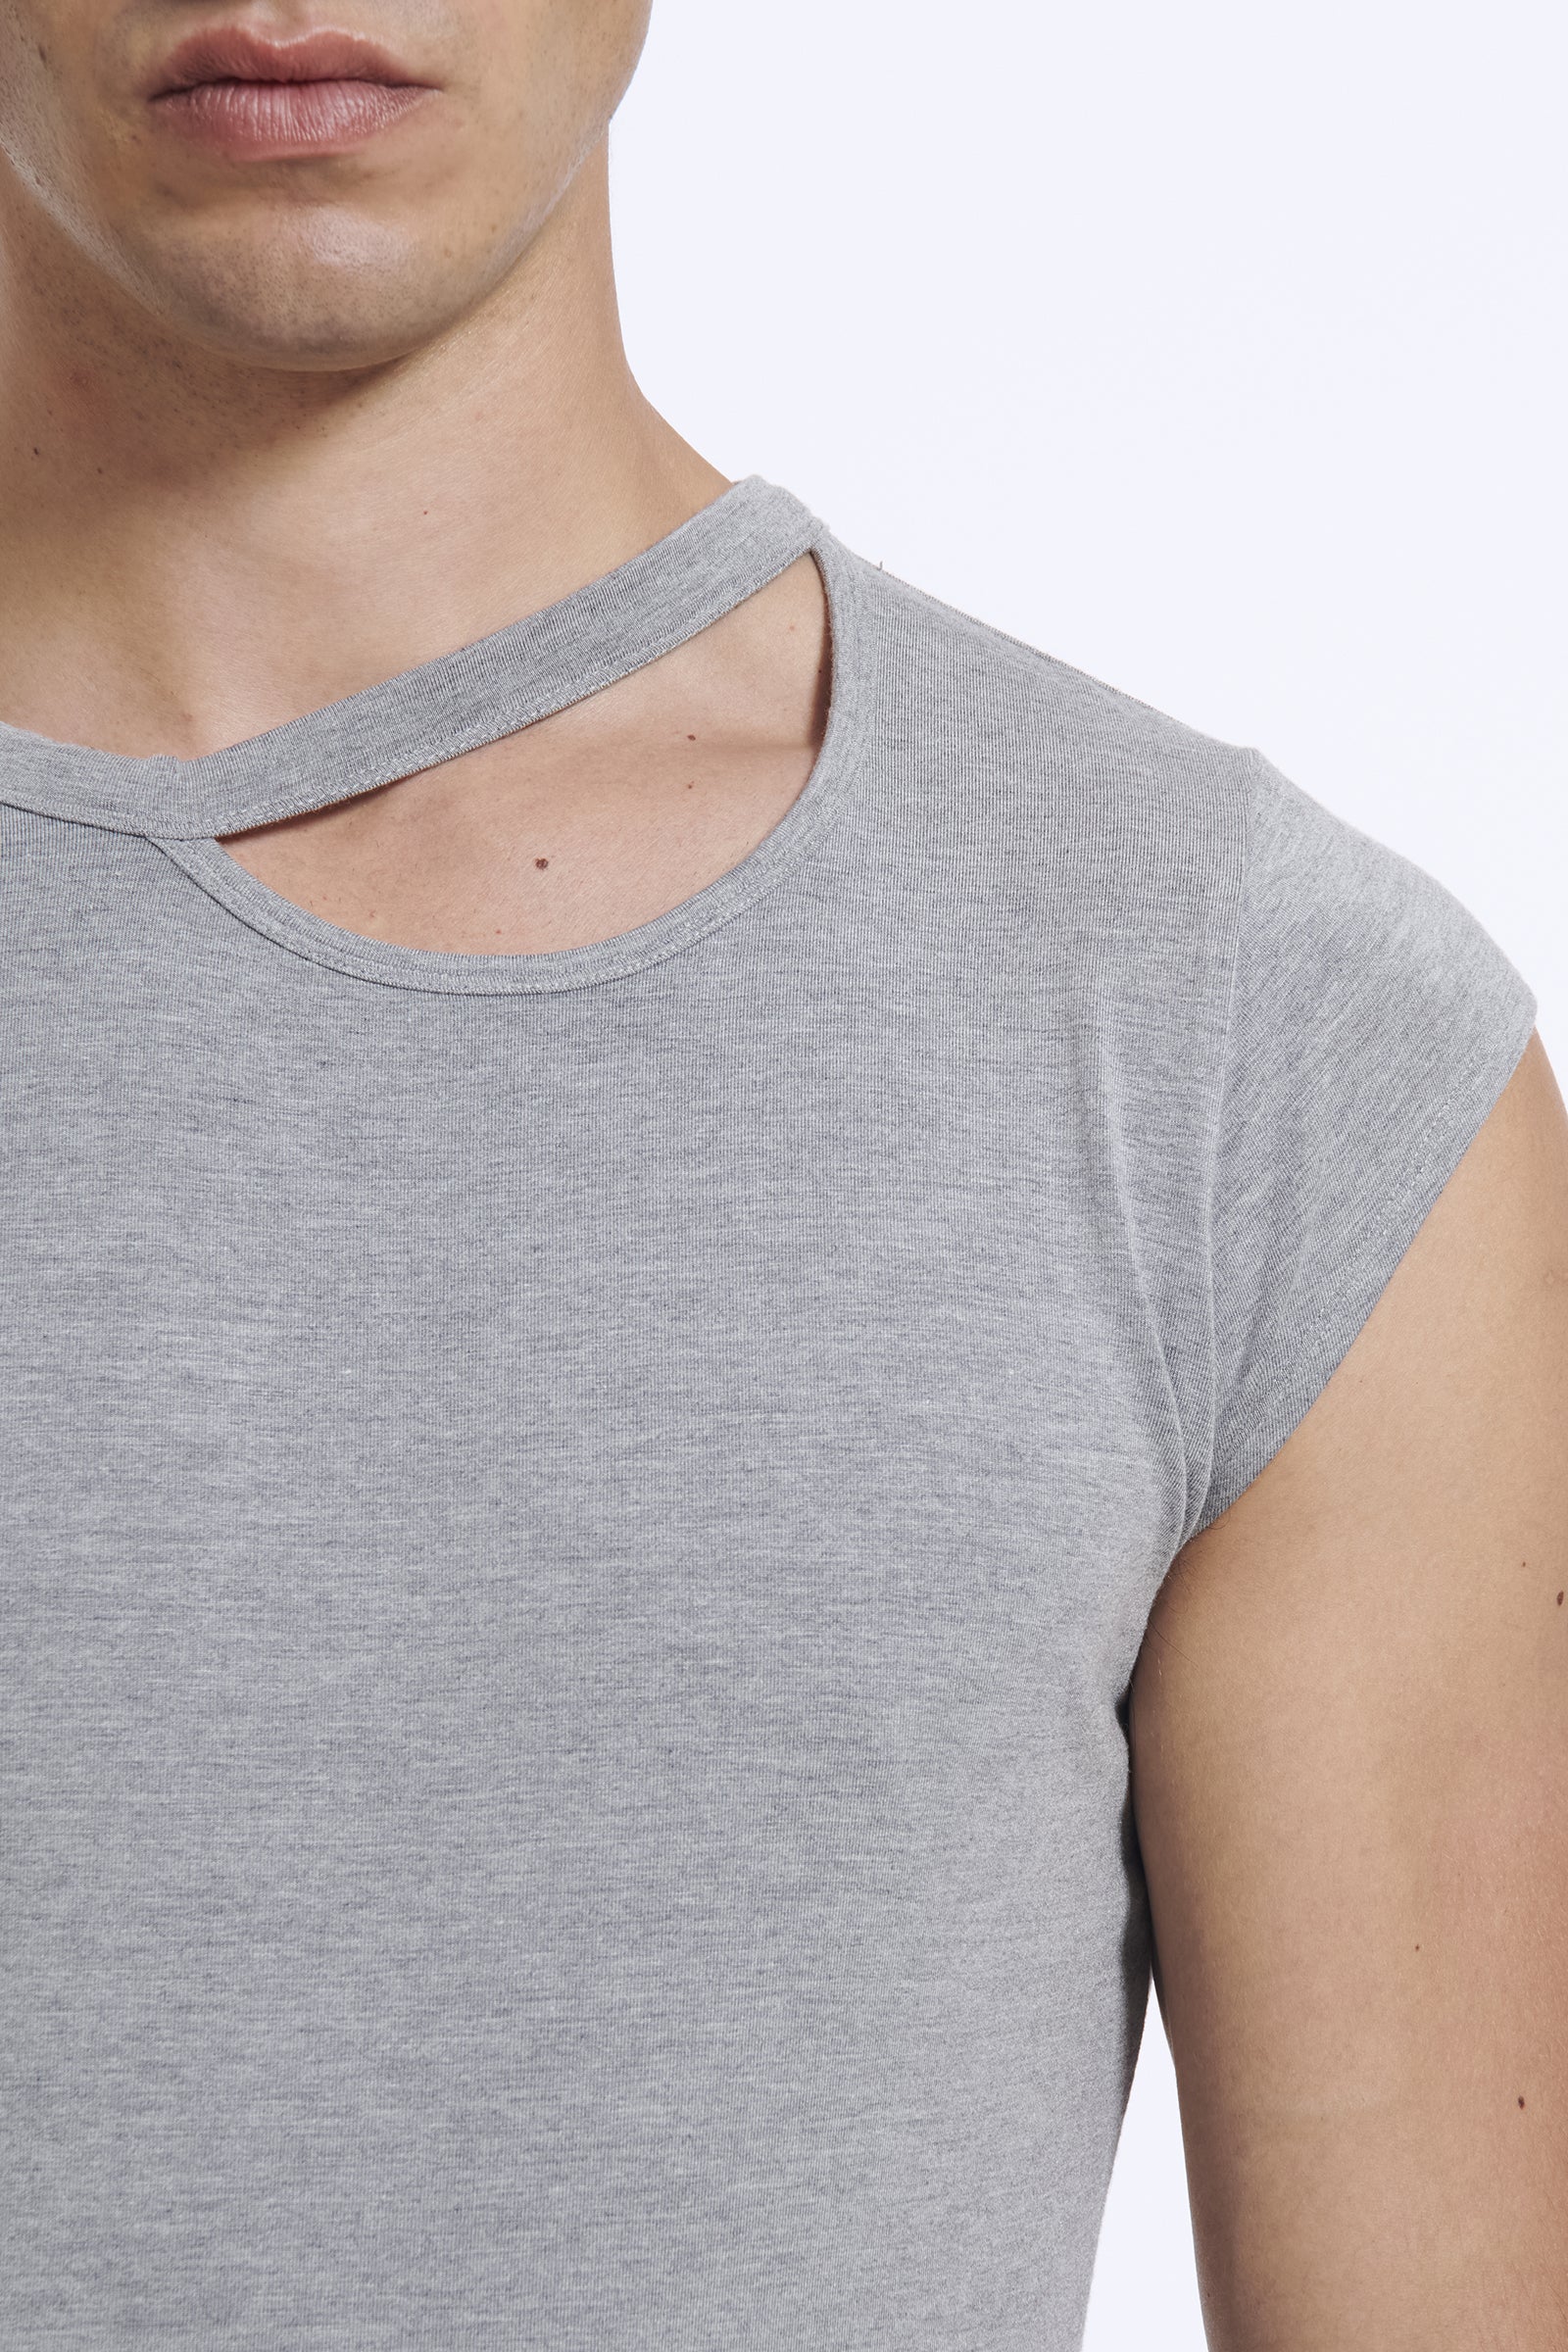 SHORT SLEEVES T-SHIRT IN MICRO MODAL